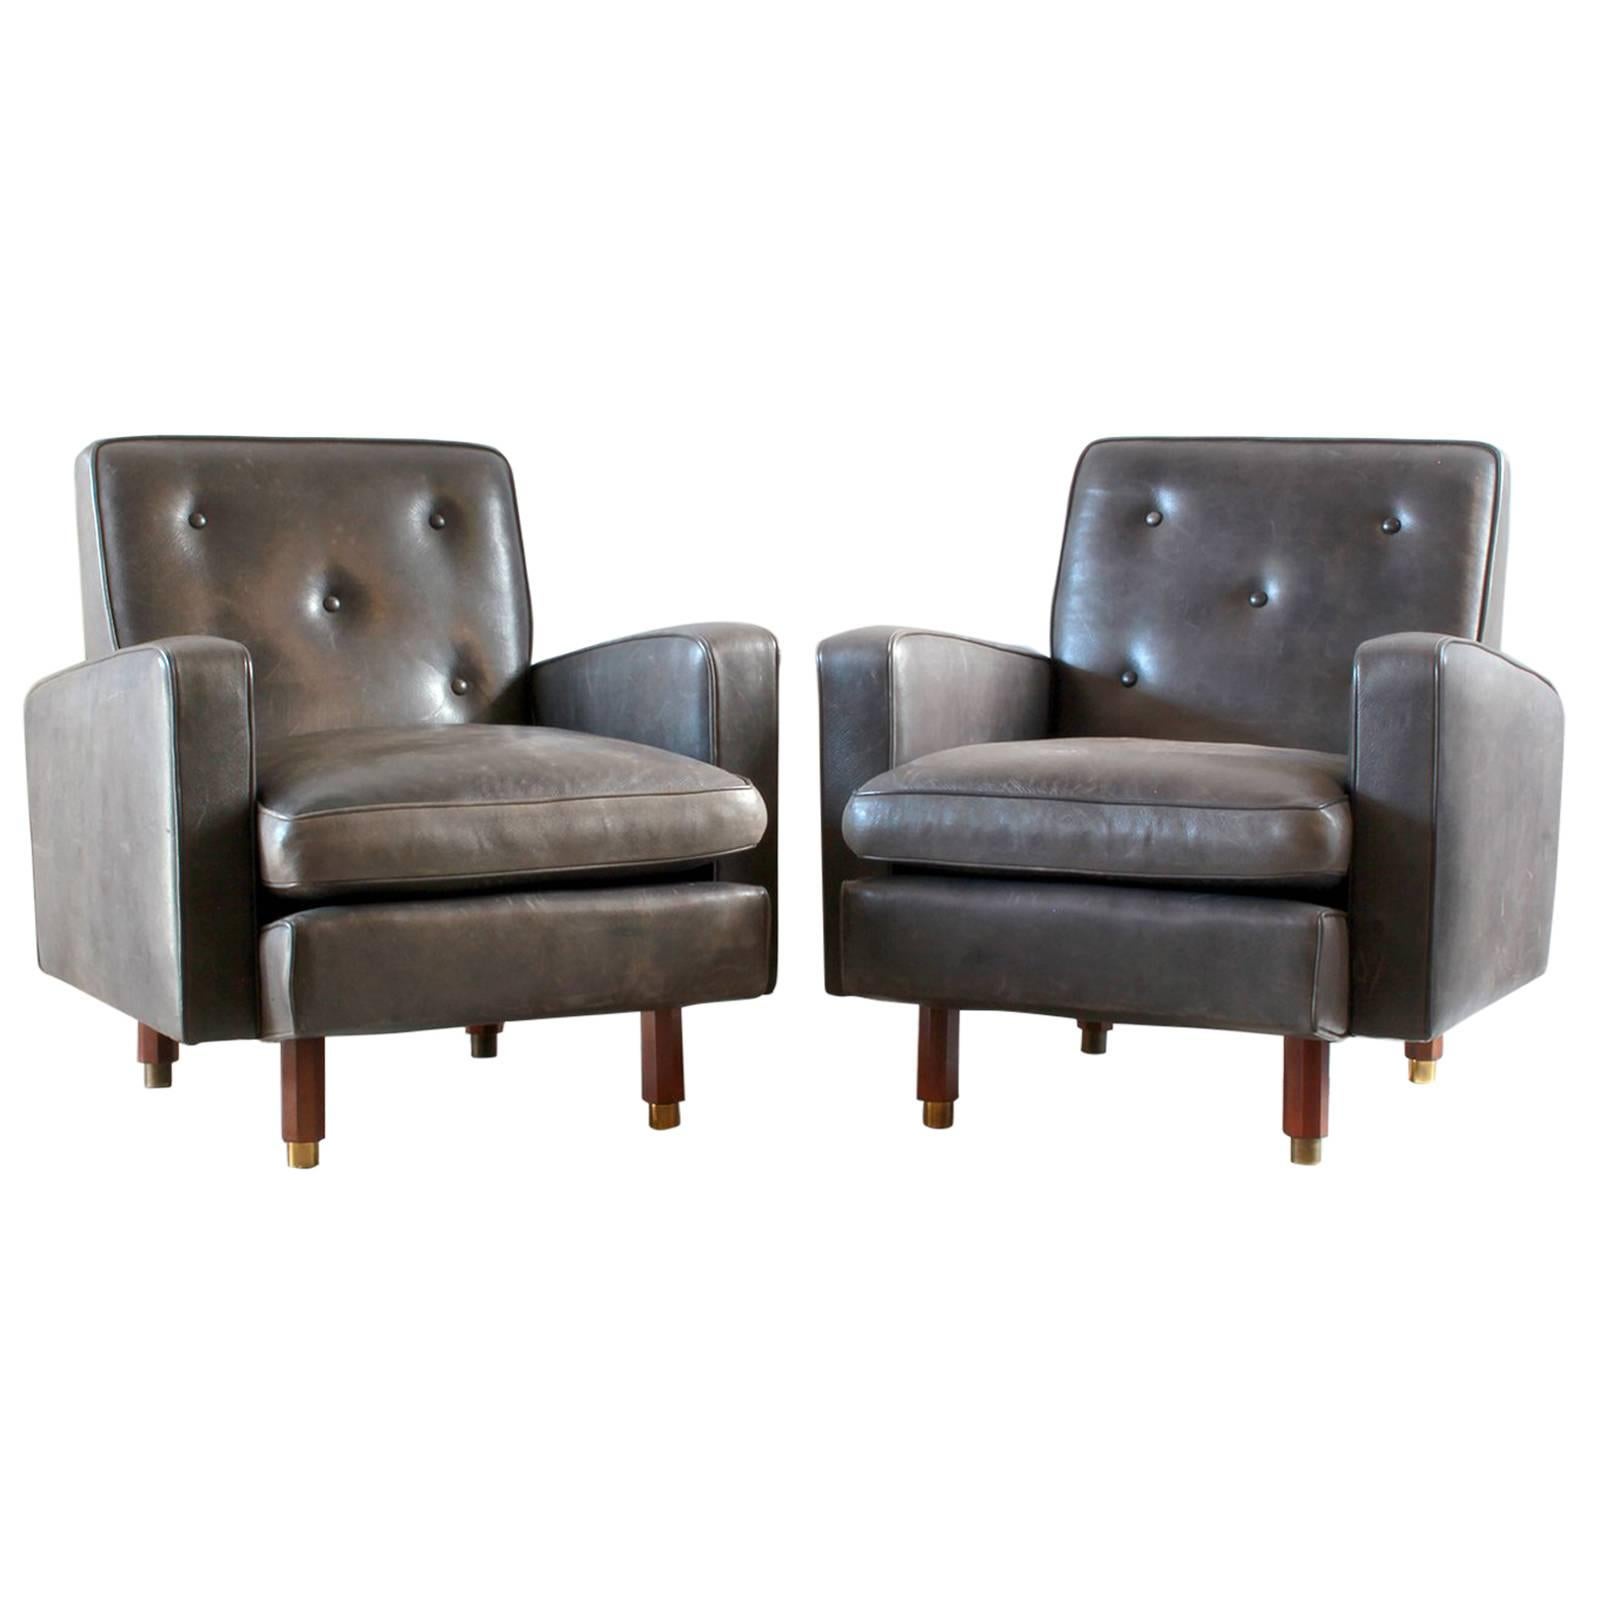 Pair of Masculine Leather Club Chairs